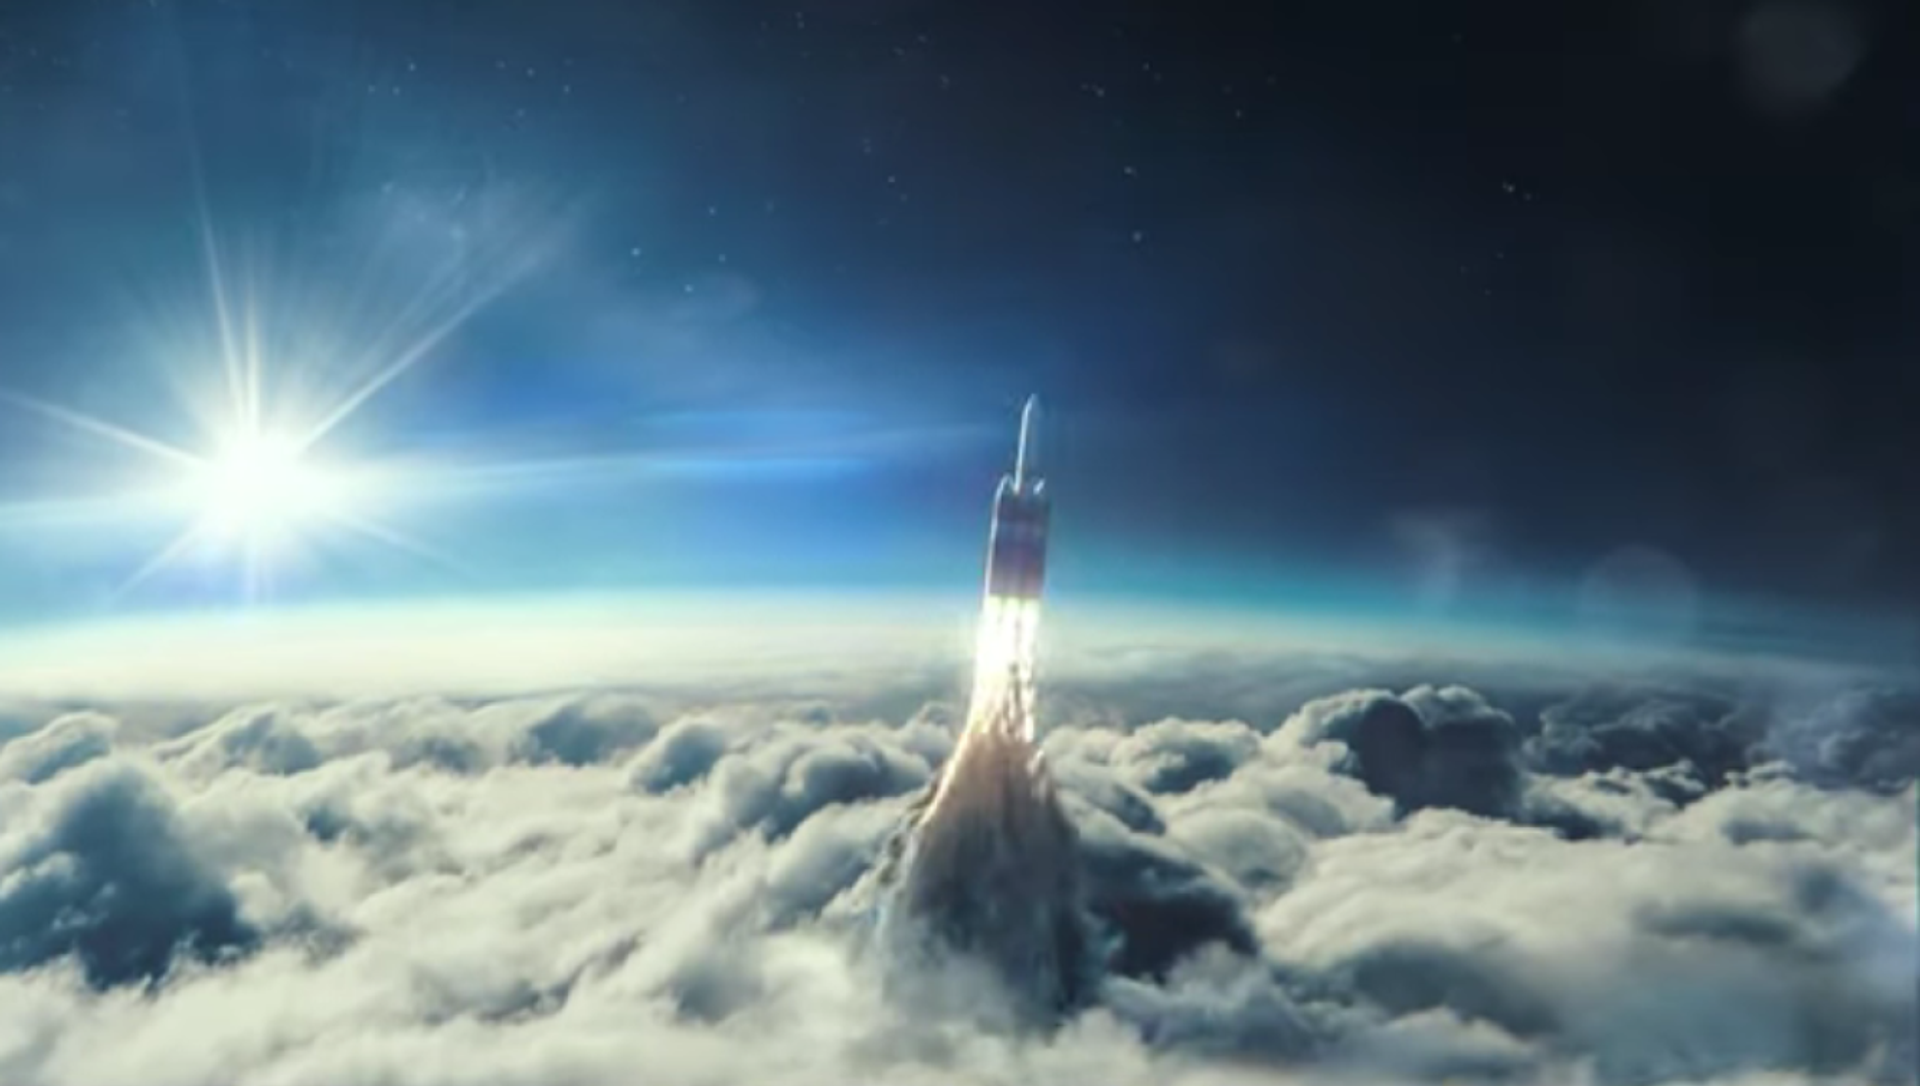 In a still from a US Space Force recruitment video, a rocket resembling the Delta IV Heavy rocket designed by United Launch Alliance blasts through the clouds - Sputnik International, 1920, 29.08.2021